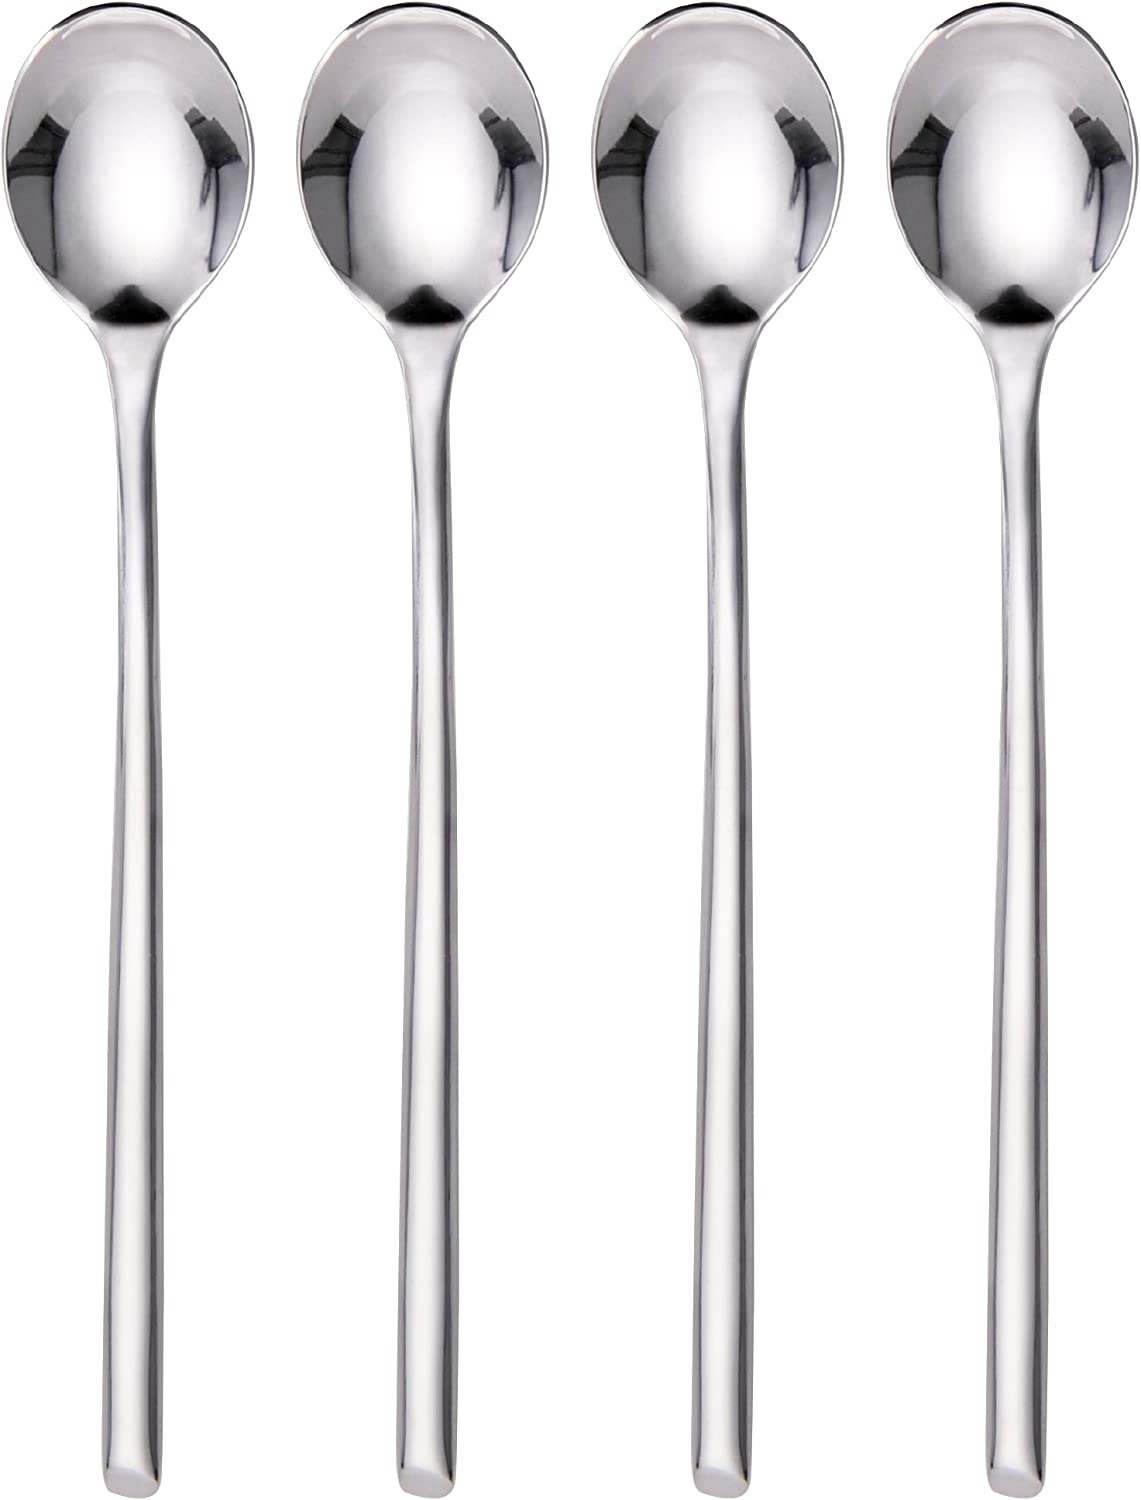 Towle Living Wave Stainless Steel Cheese Spreader, Set of 4 Import To Shop ×Product customization General Description Gallery